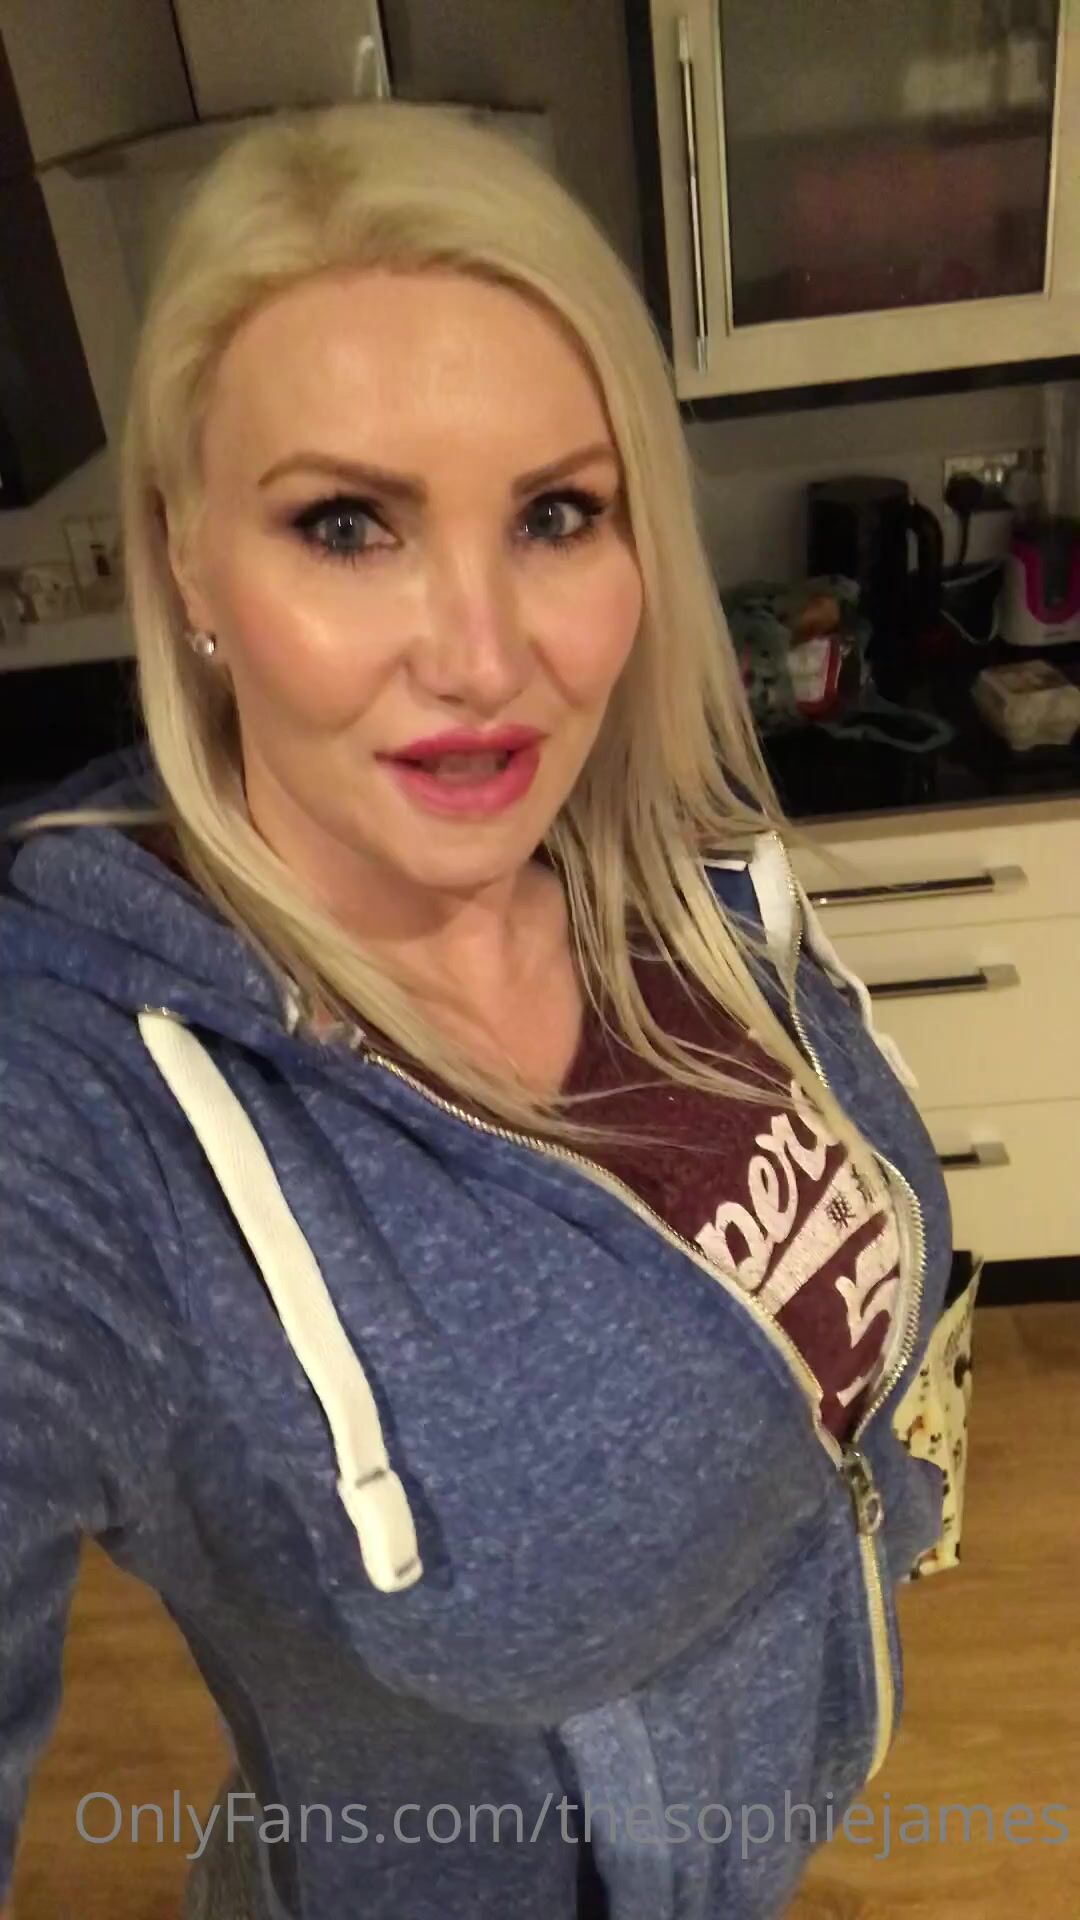 Watch Online Sophie James Aka Thesophiejames Onlyfans Throwback Thursday Pussy 7 On X Video